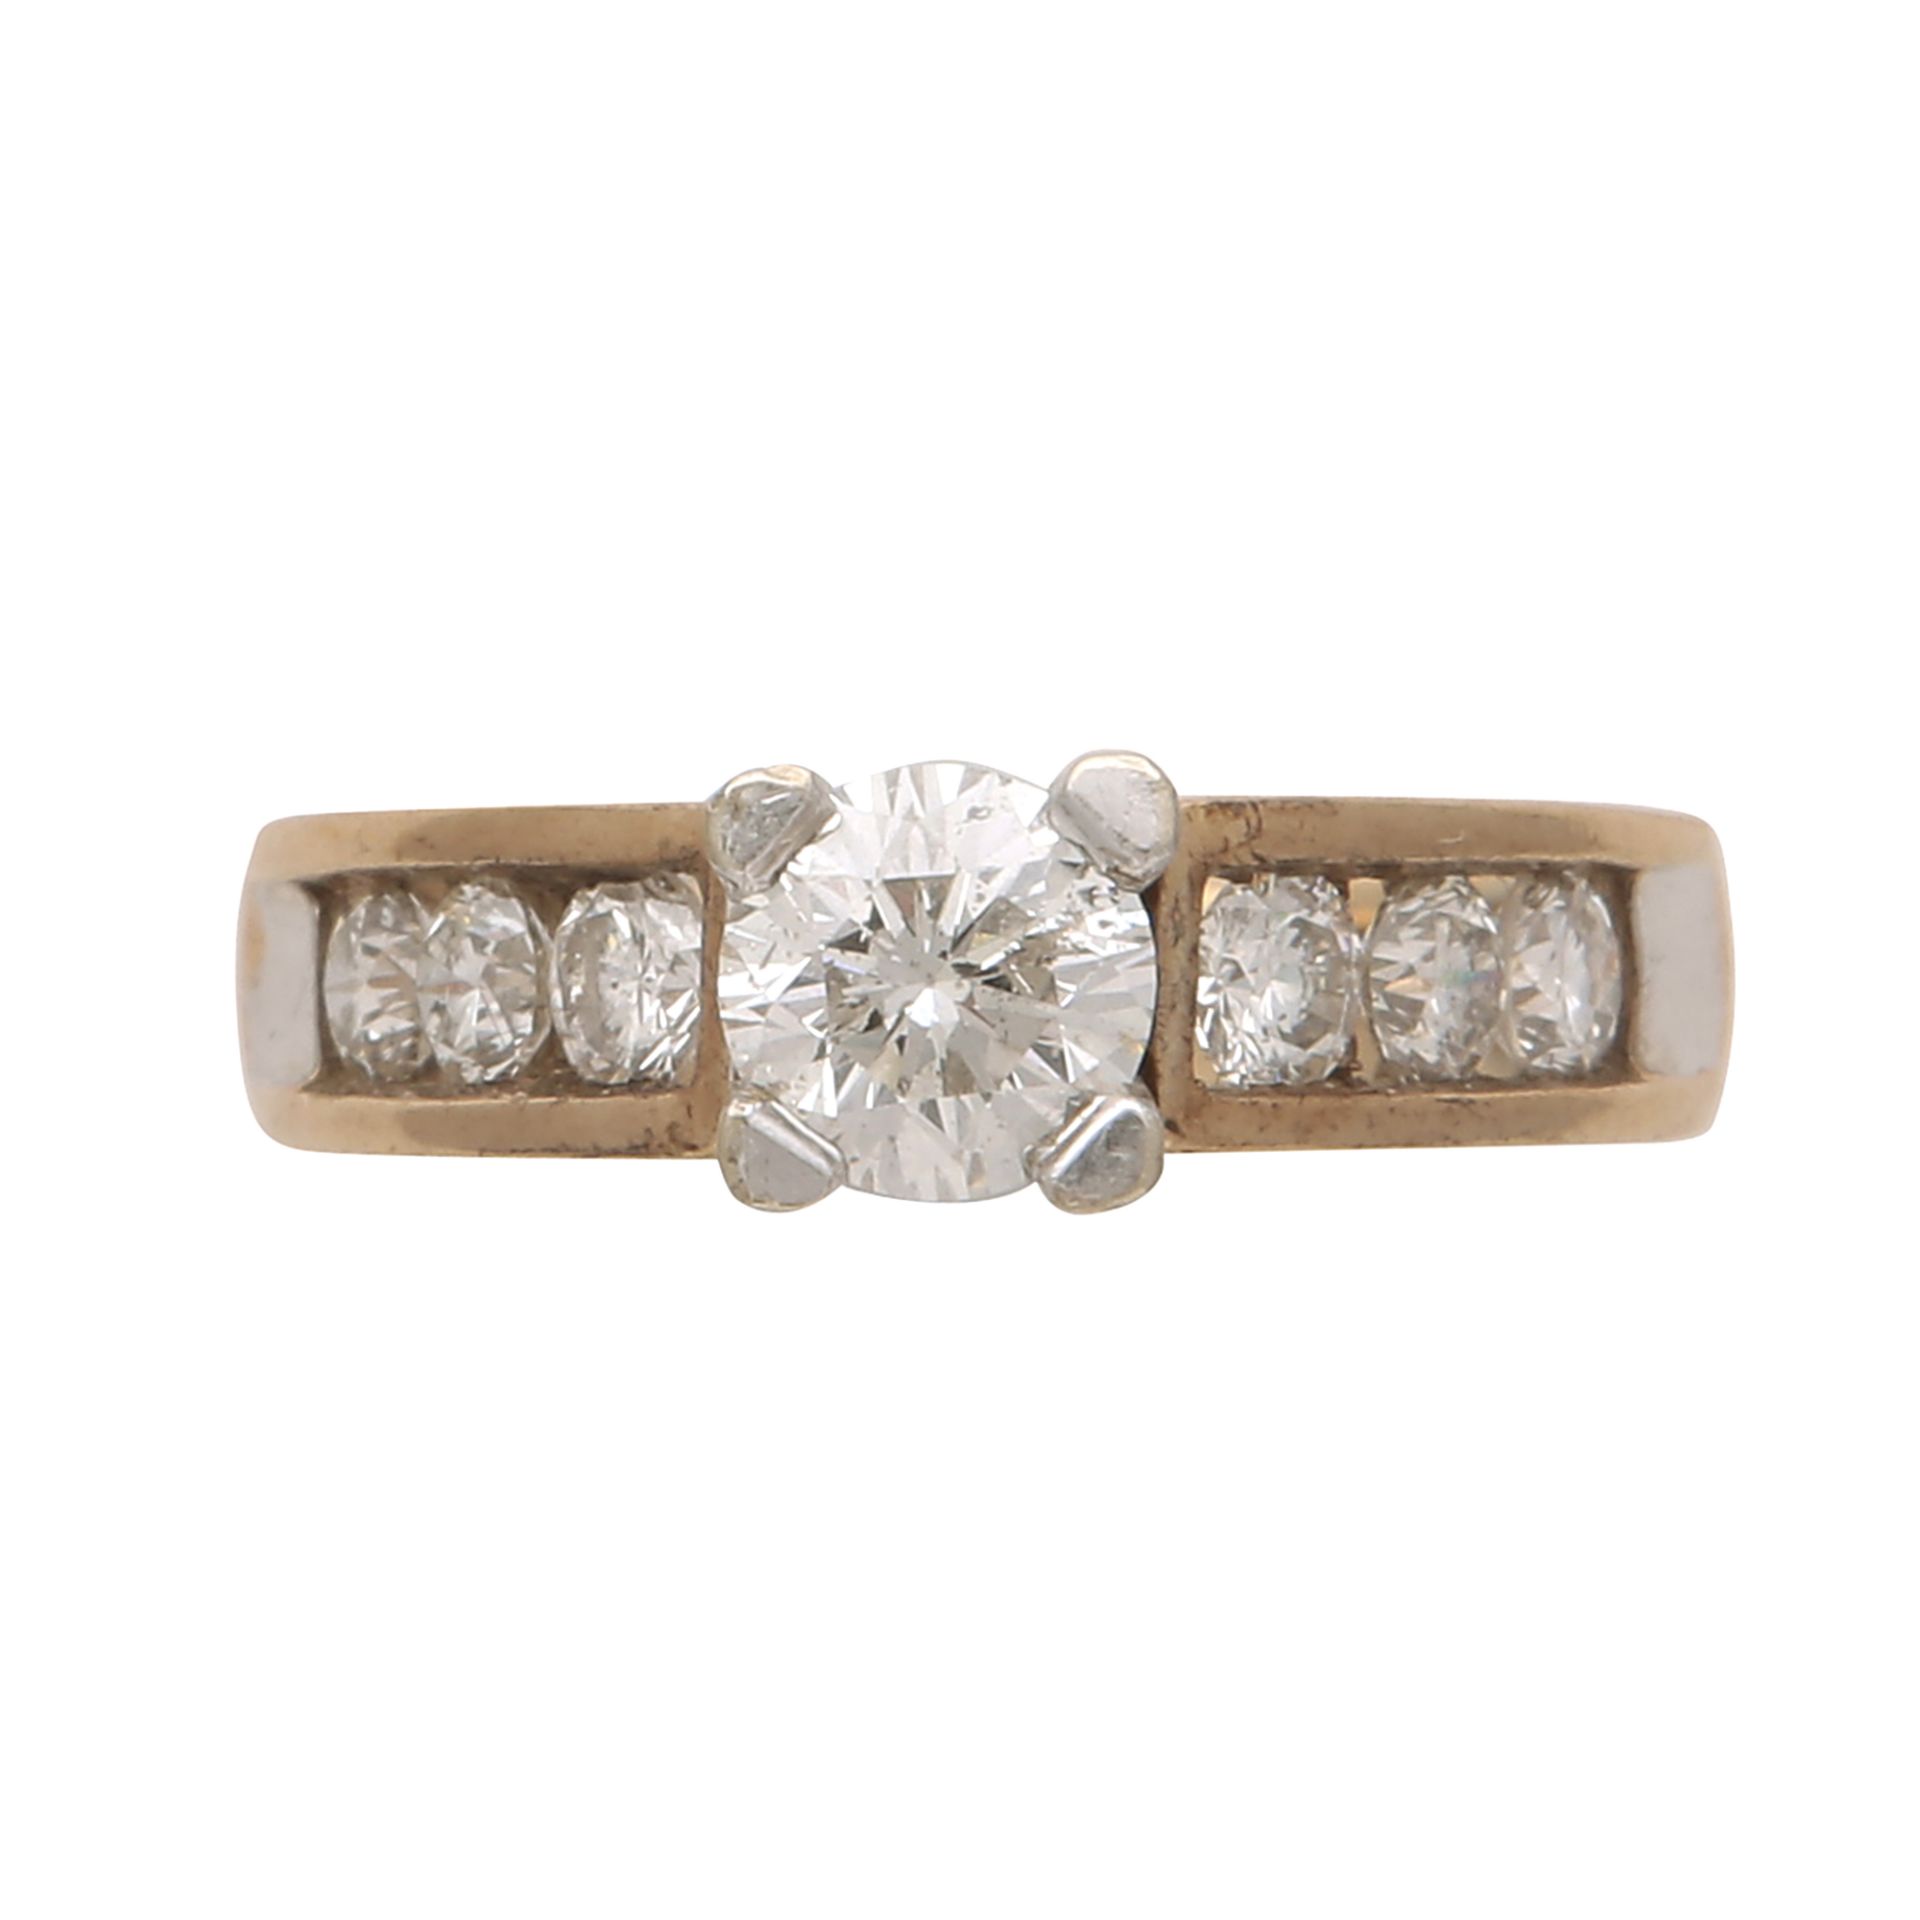 A diamond dress ring in yellow gold set with a round cut stone weighing approximately 0.76cts,